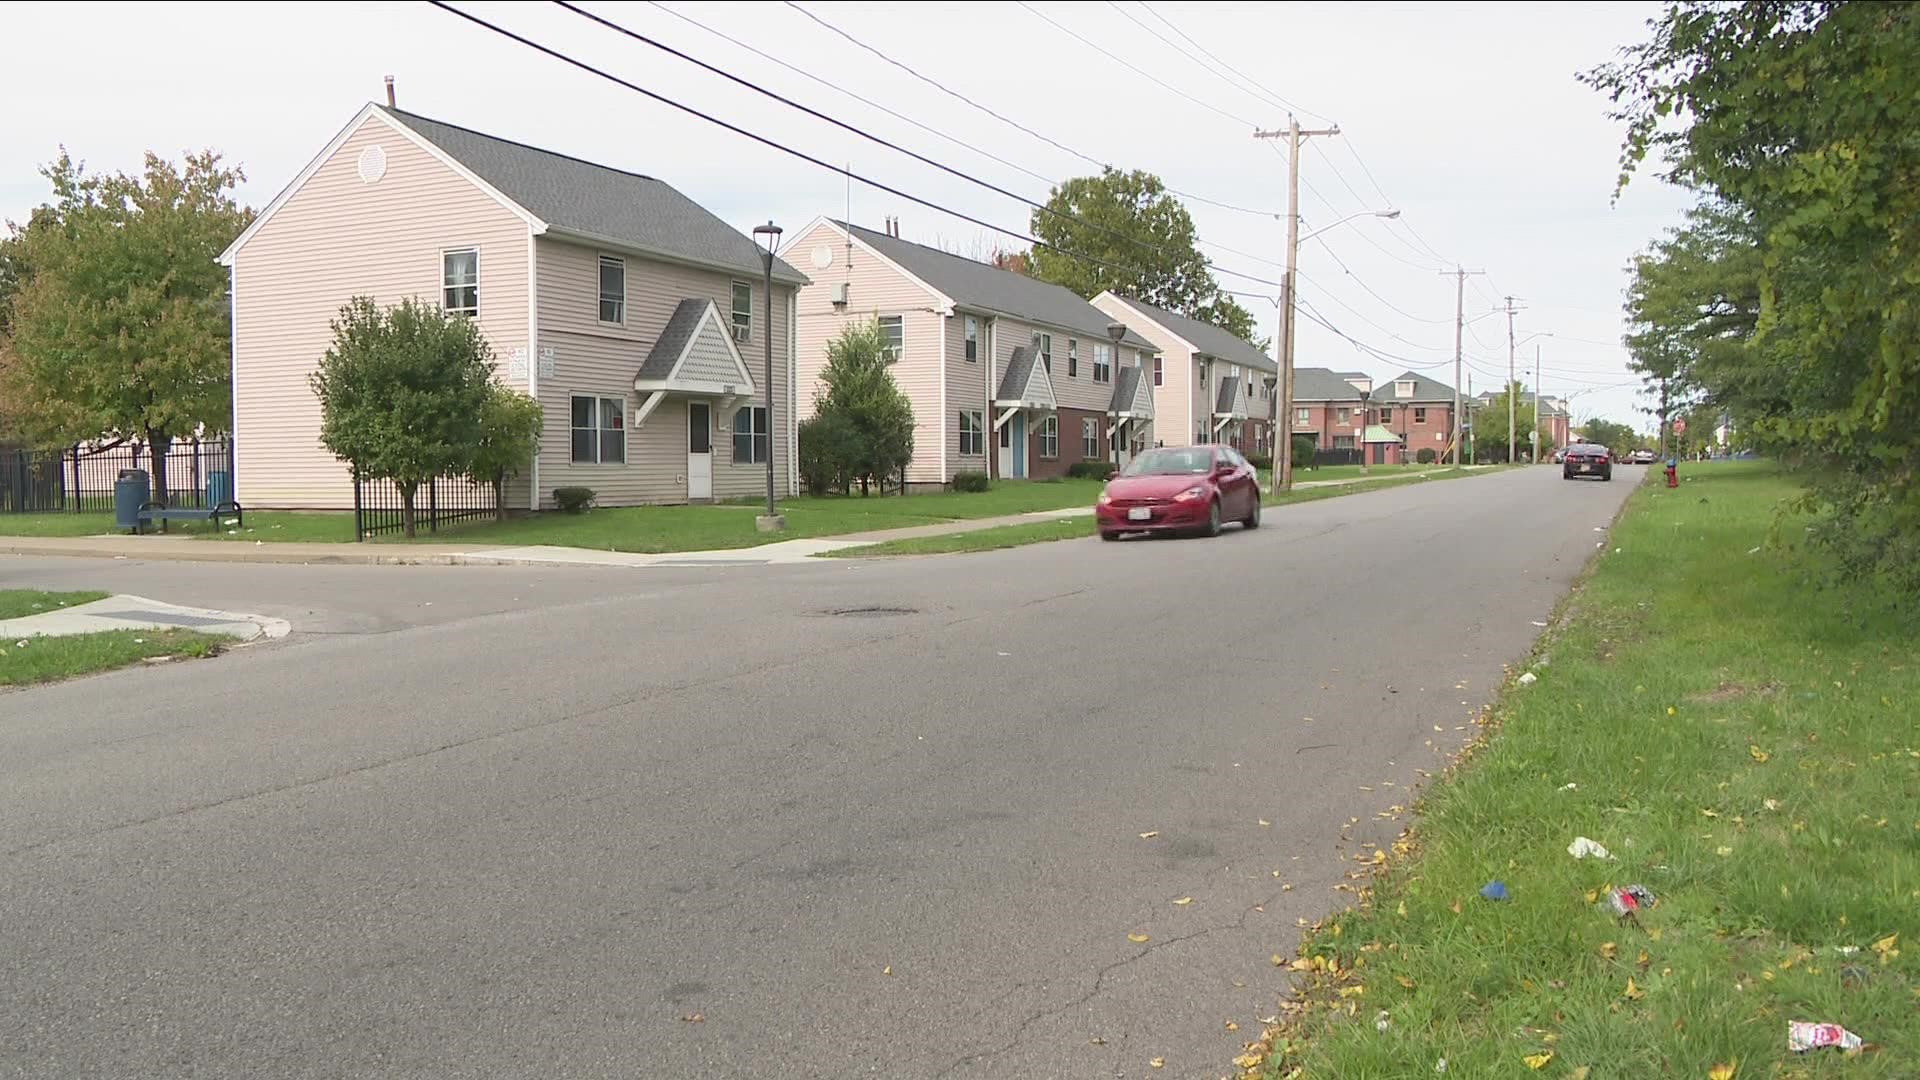 BUFFALO POLICE SAY THE 32-YEAR-OLD WAS OUTISDE ON EDISON AVENUE WHEN IT HAPPENED.